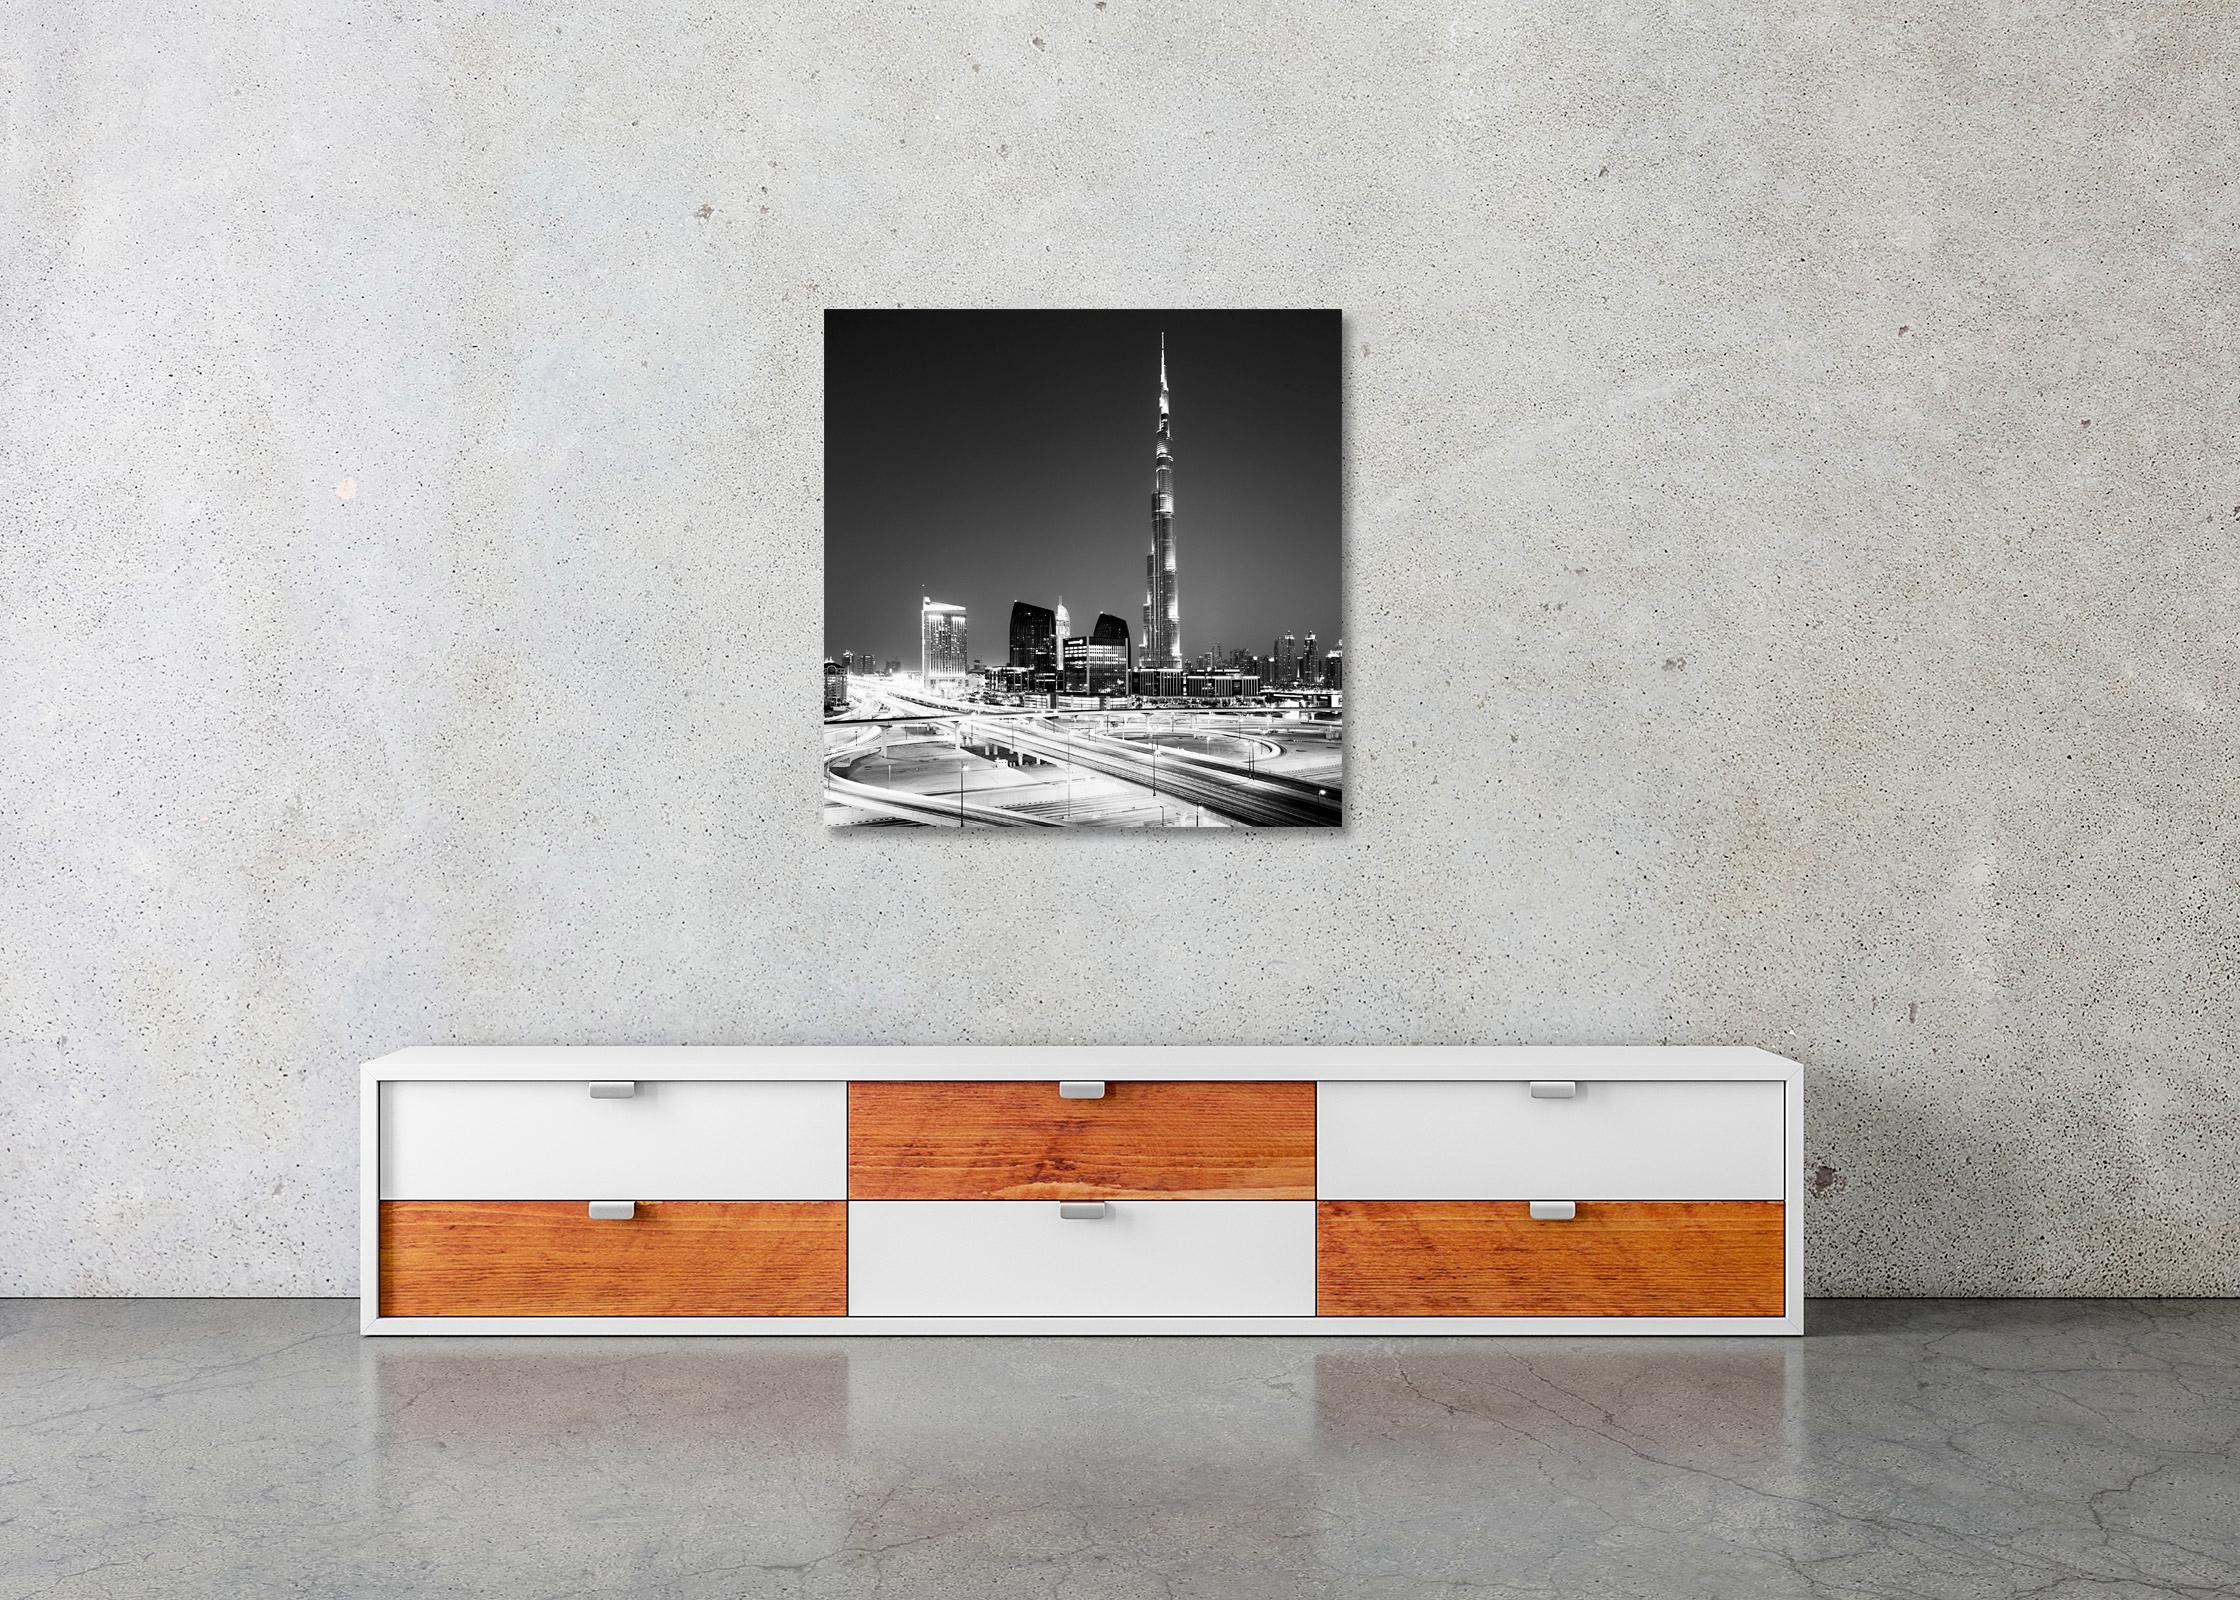 Black and White Fine Art Cityscape Photography. Archival pigment ink print, edition of 9. Signed, titled, dated and numbered by artist. Certificate of authenticity included. Printed with 4cm white border.
International award winner photographer -